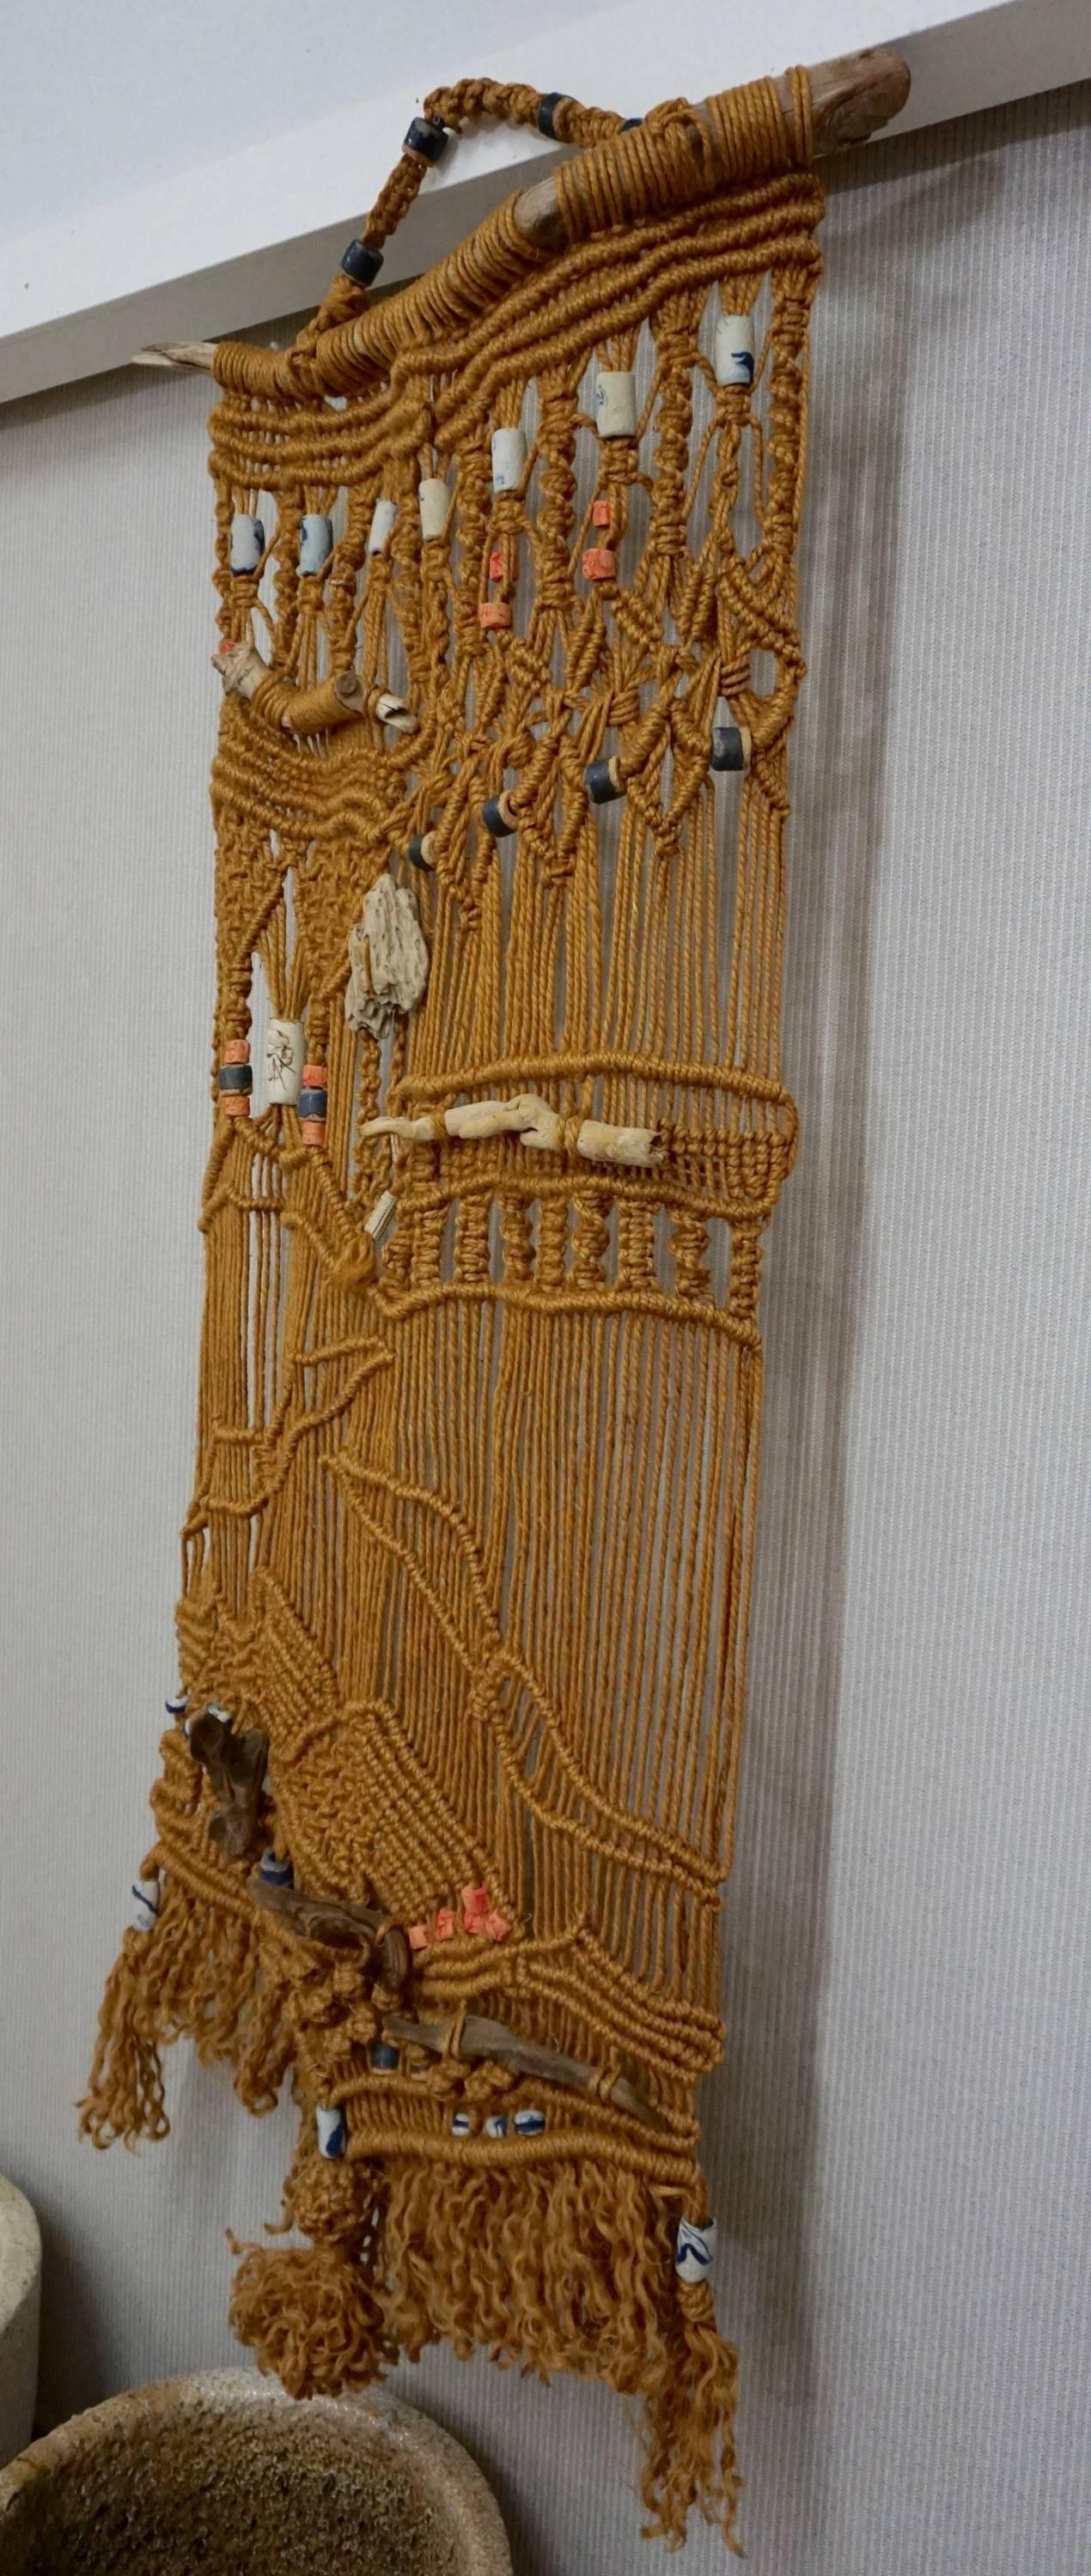 Excellent example of jute macrame imbedded with ceramic beads, stones and driftwood.